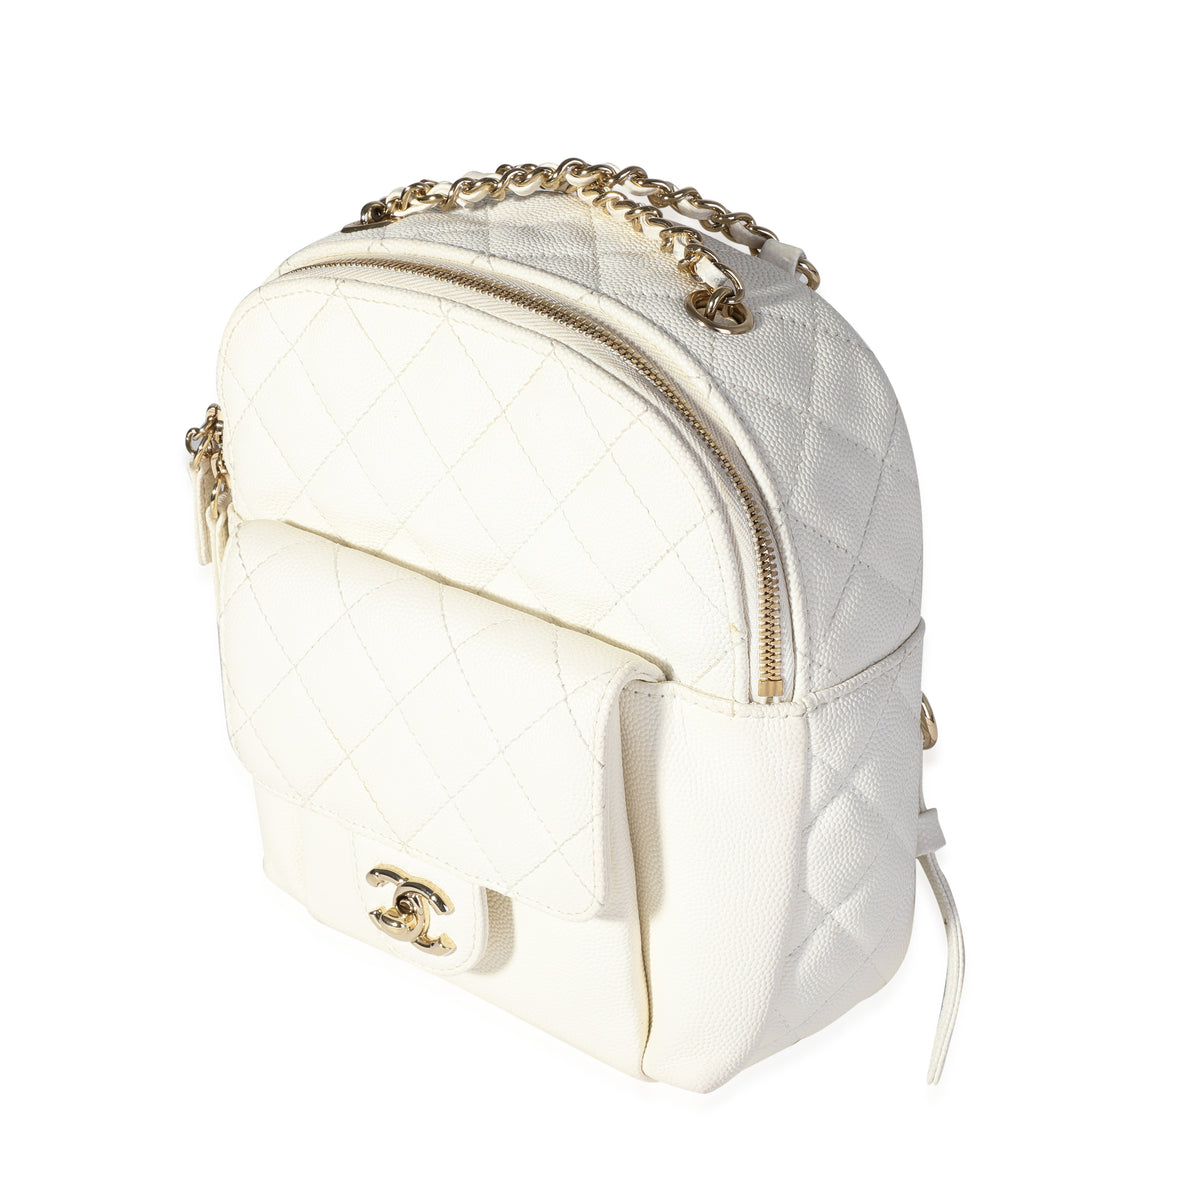 SASOM | bags Chanel Backpack In Grained Shiny Calfskin With Gold Hardware  Black Check the latest price now!